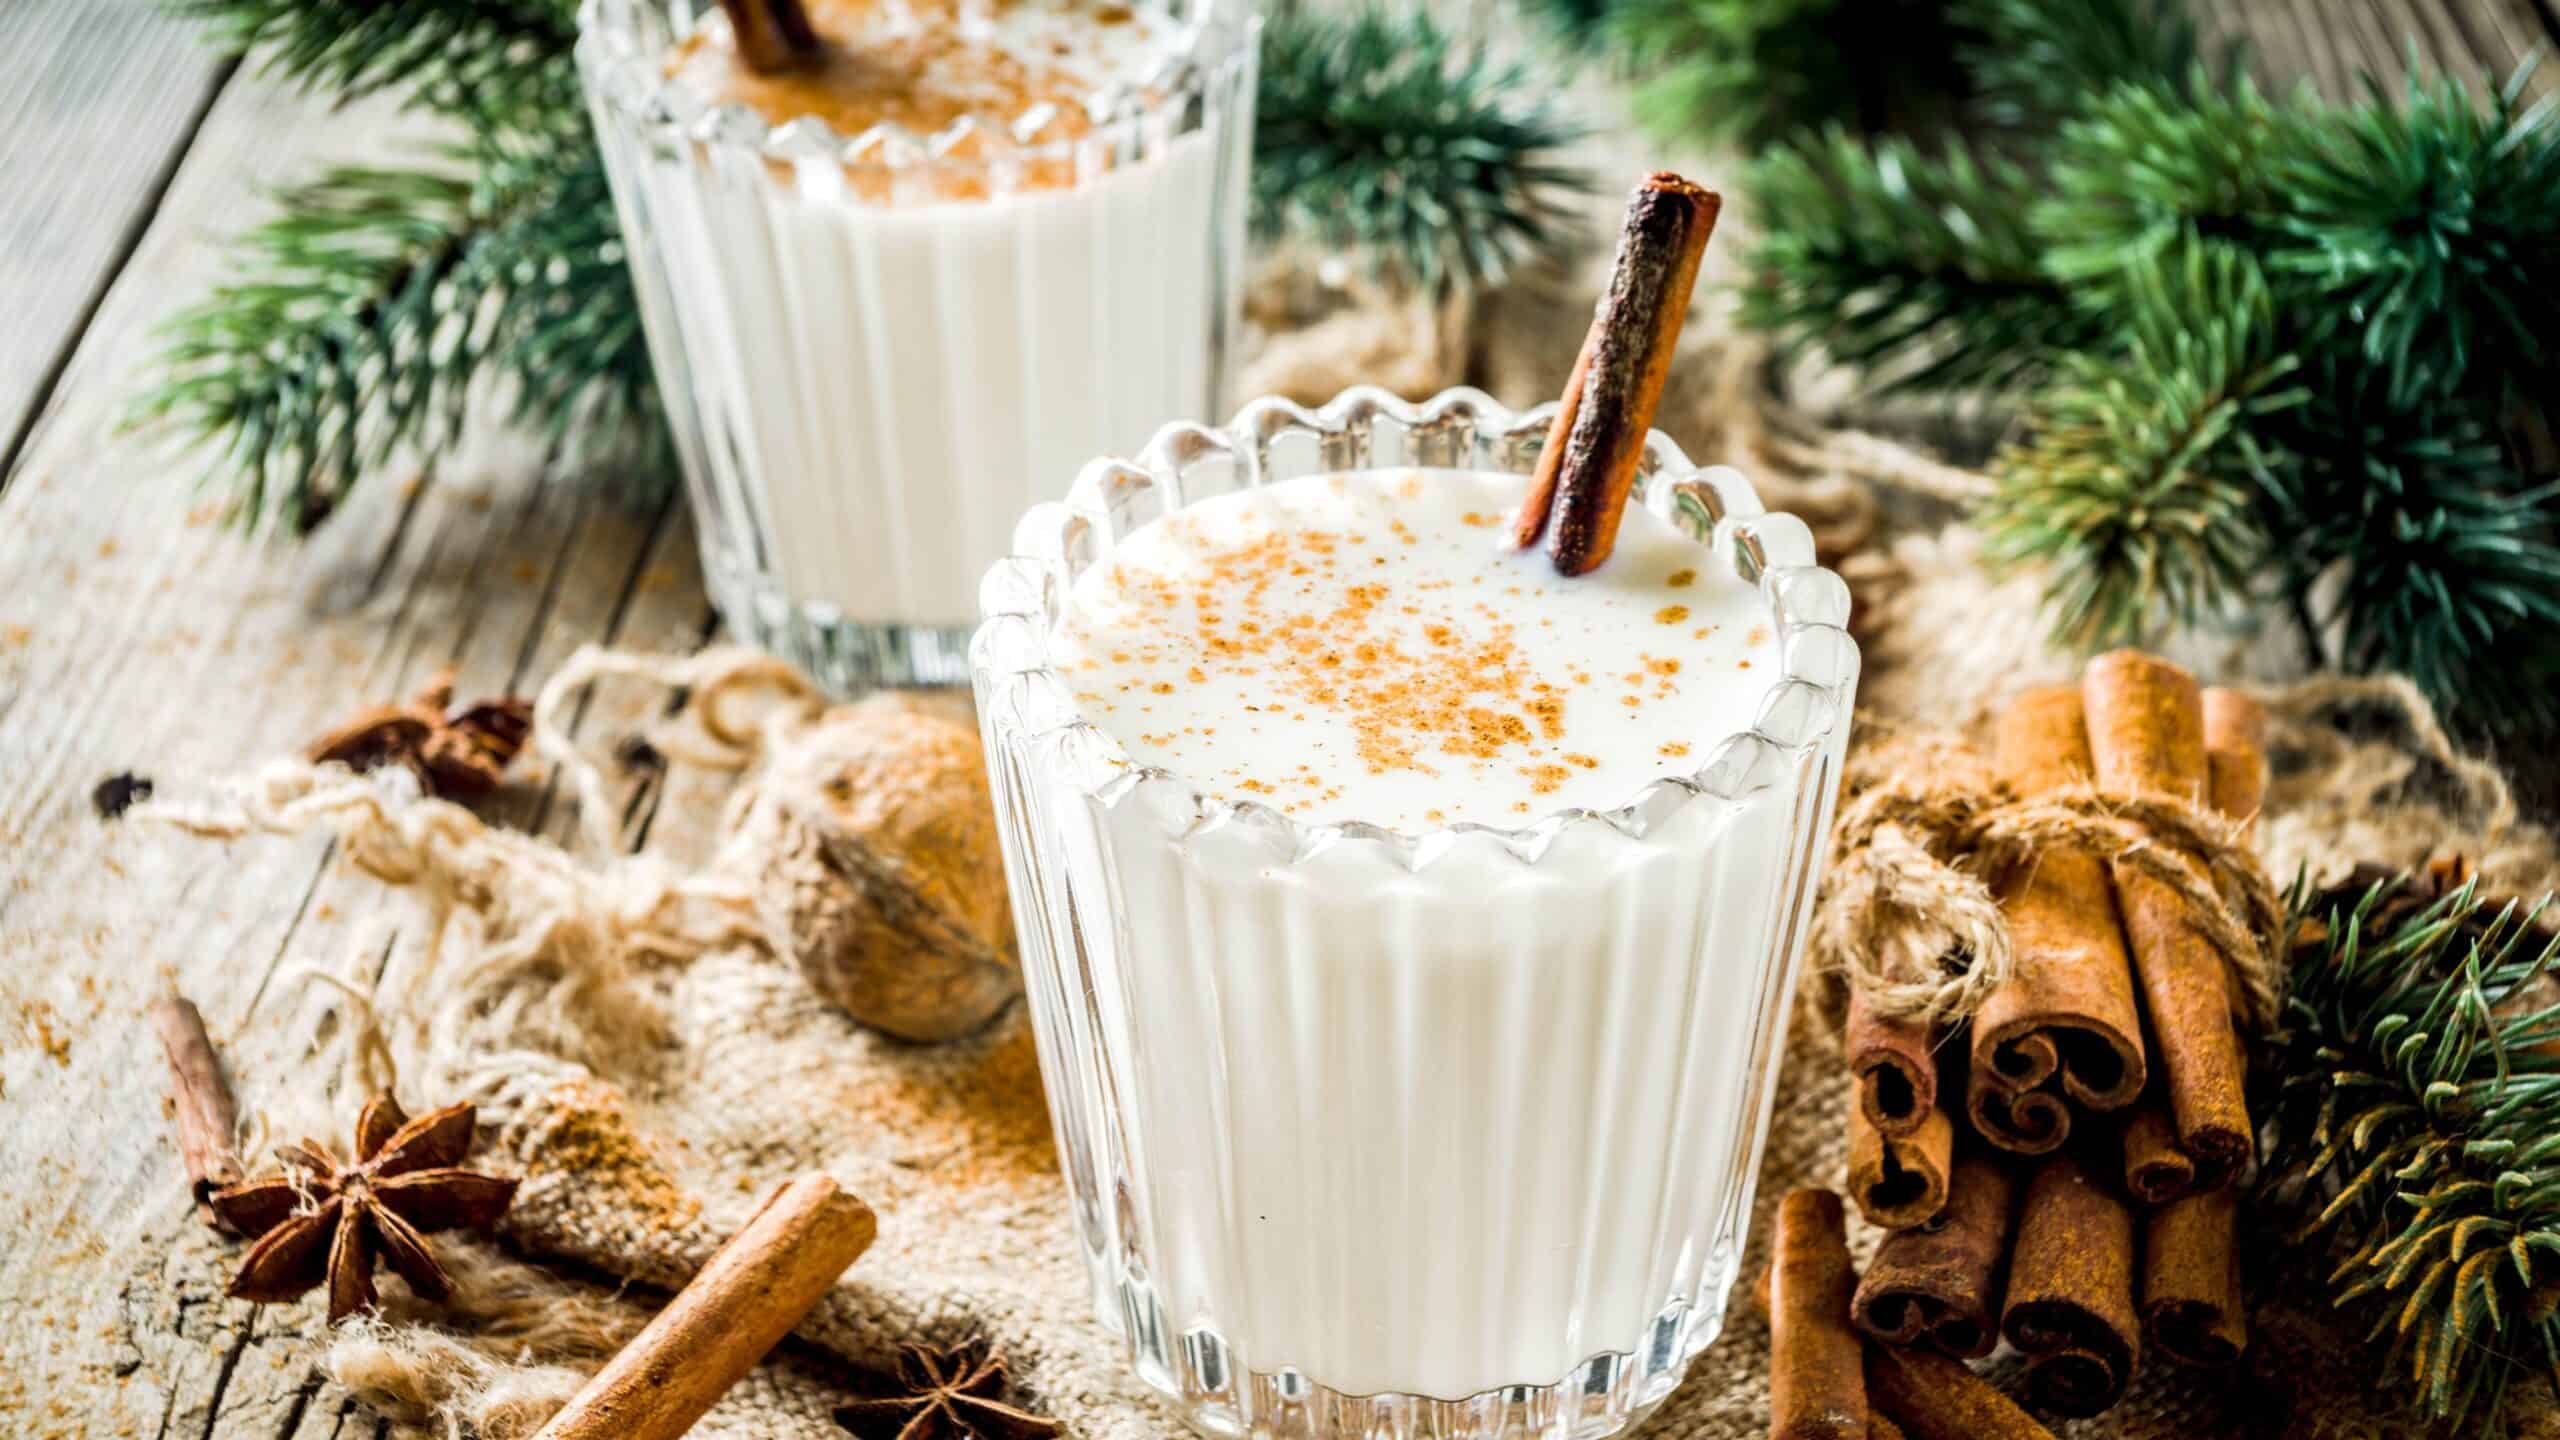 Breaking 3 Eggnog Myths for New Year’s Eve: Food Safety News